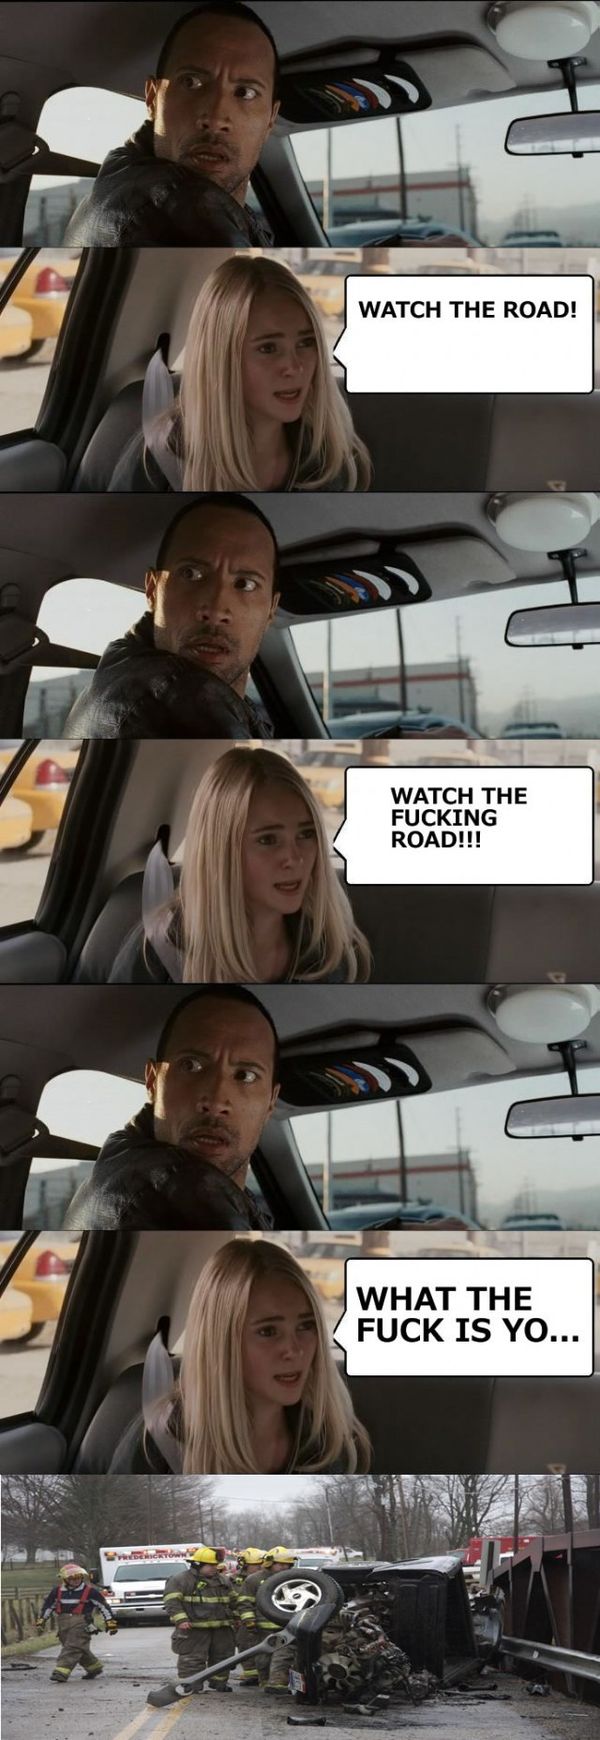 WATCH THE ROAD! WATCH THE F✡✞KING ROAD!!! WHAT THE F✡✞K IS YO...